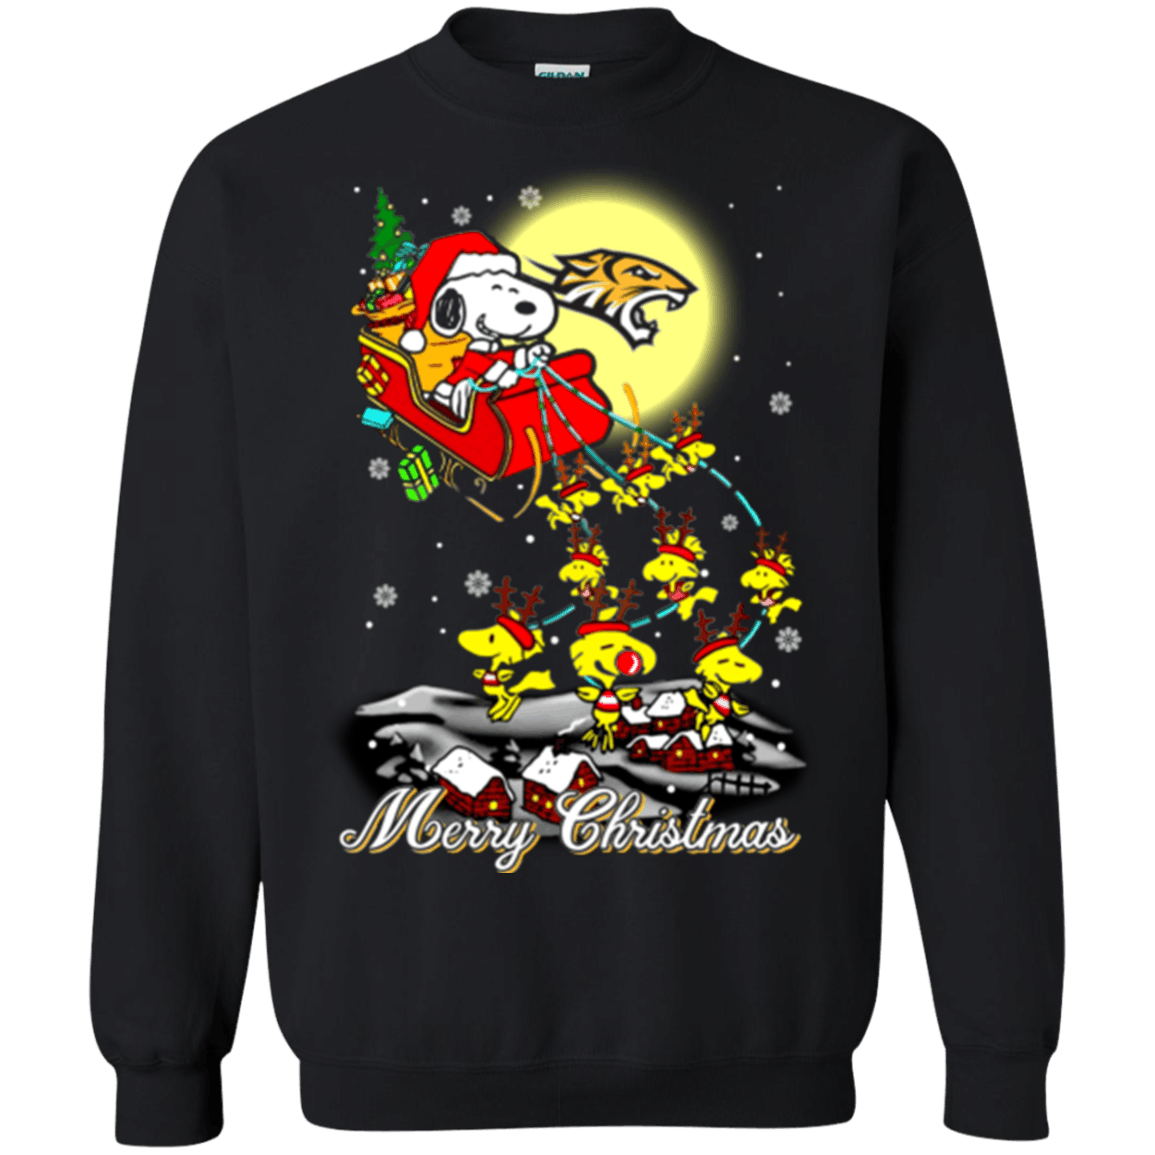 Excellent Towson Tigers Ugly Christmas Sweater 2023S Santa Claus With Sleigh And Snoopy Sweatshirts